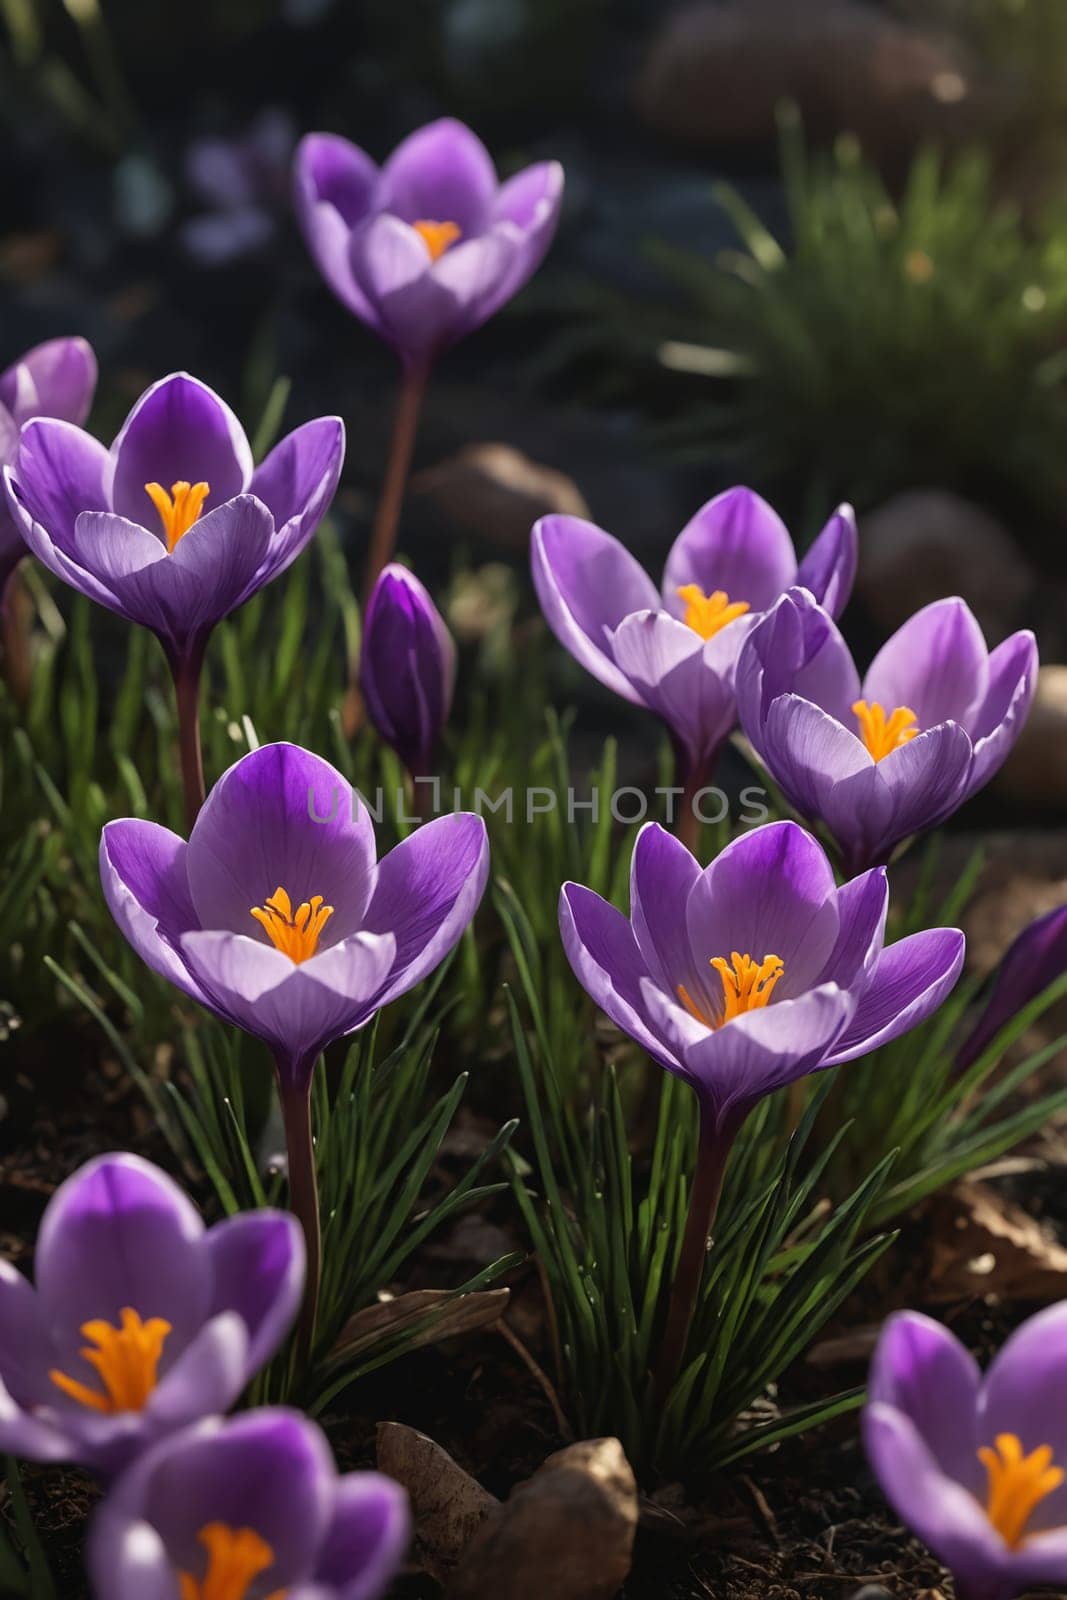 This image showcases the vibrant colors of crocuses announcing the arrival of spring. Perfect for use in garden blogs or seasonal nature articles.